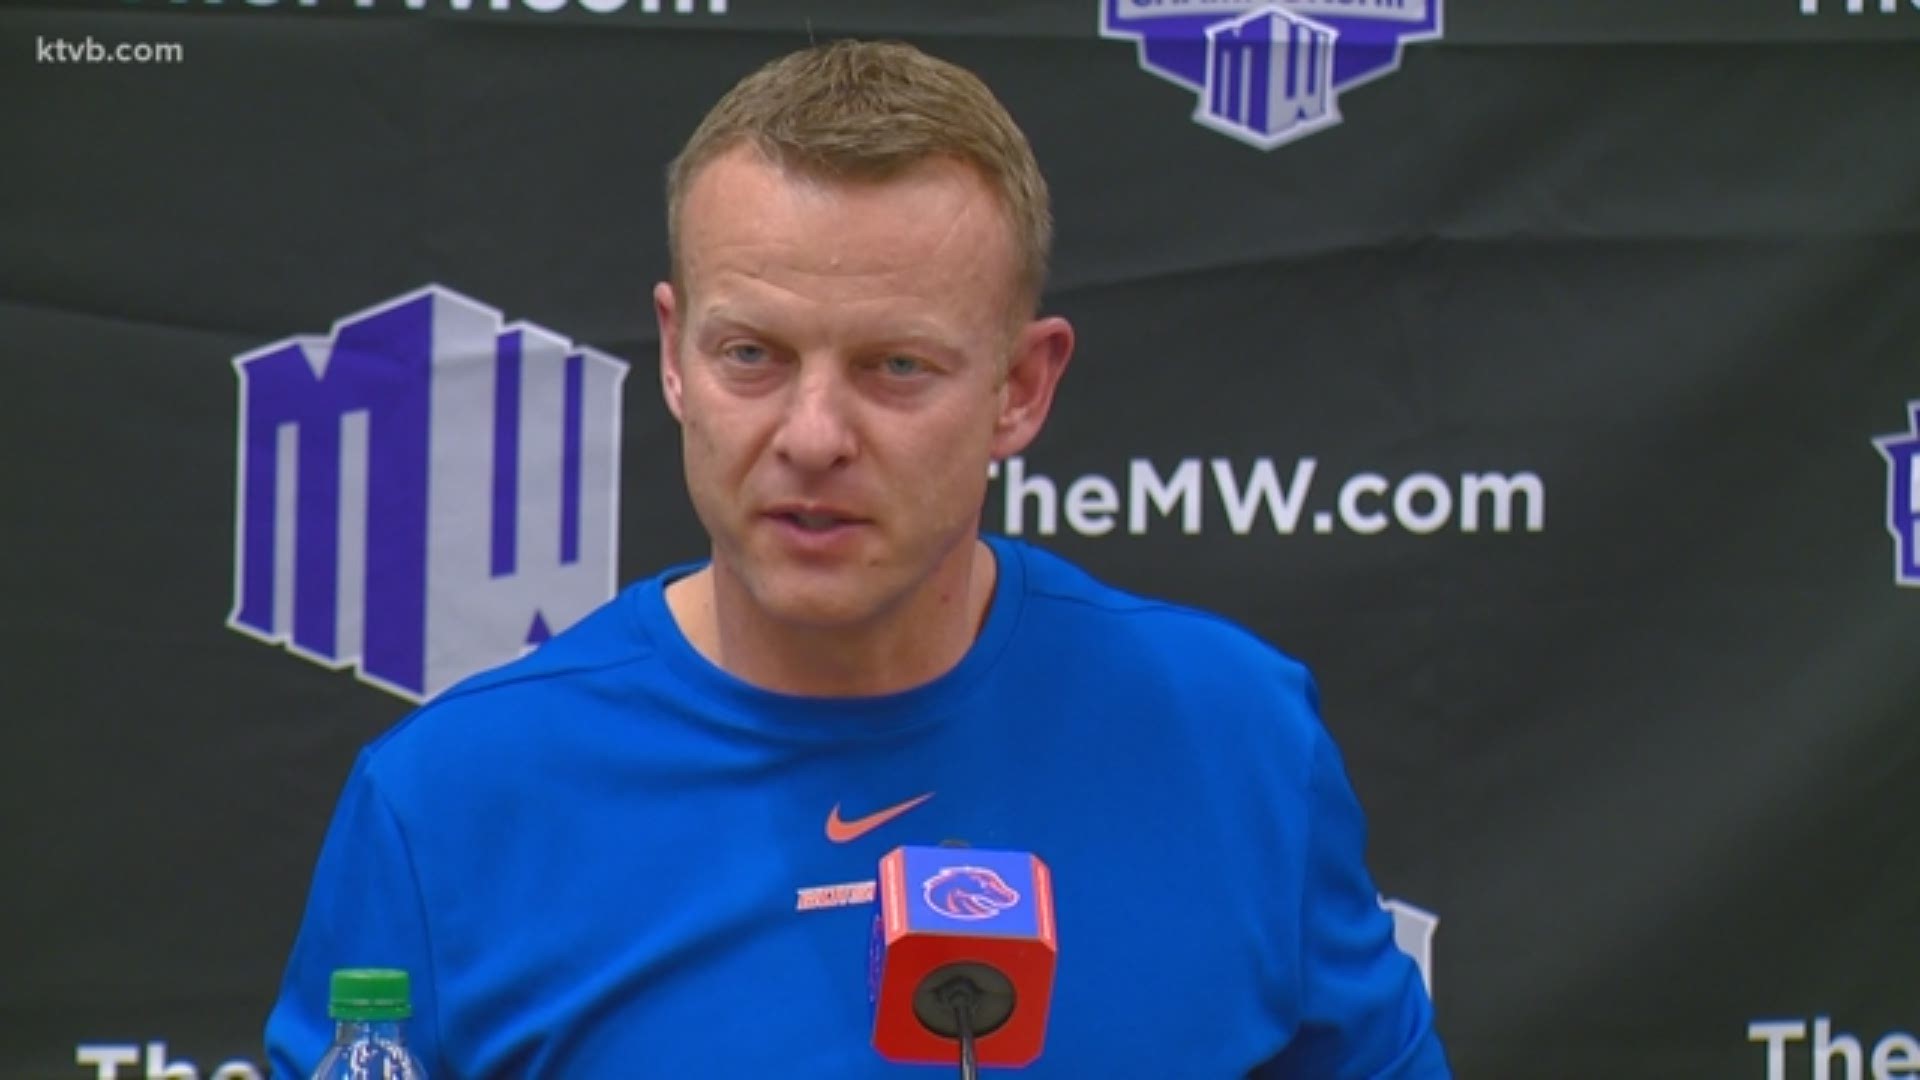 In a surprising announcement, Washington's Coach Pete said he will step down as head coach. Harsin, who worked under Coach Pete at Boise State, reacts to the news.